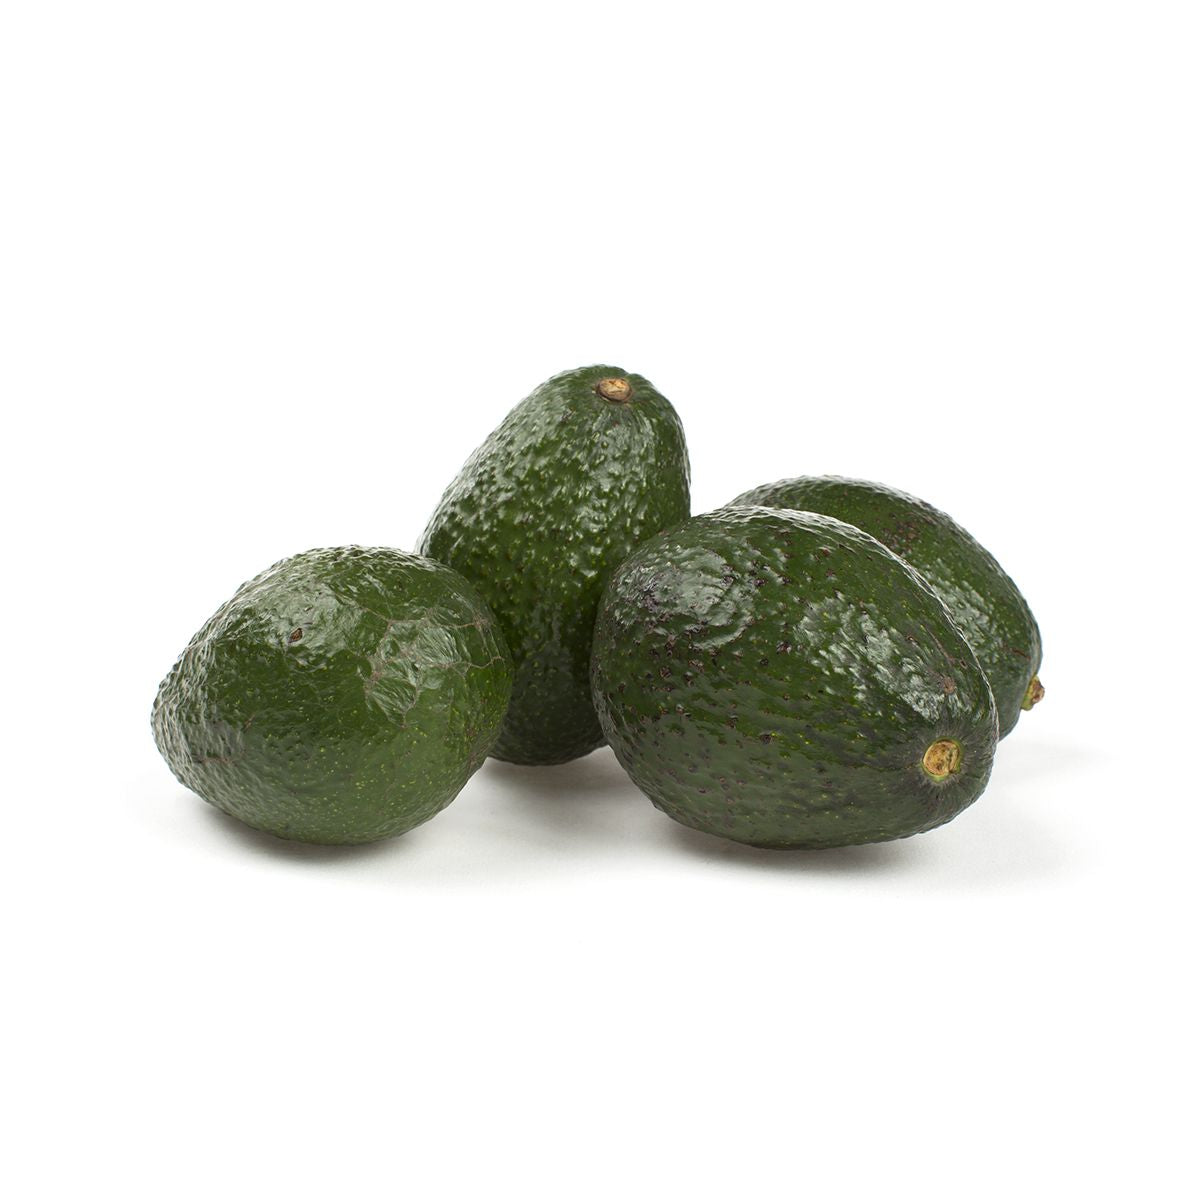 Avocados From Mexico Firm Hass Avocados 3 Pack